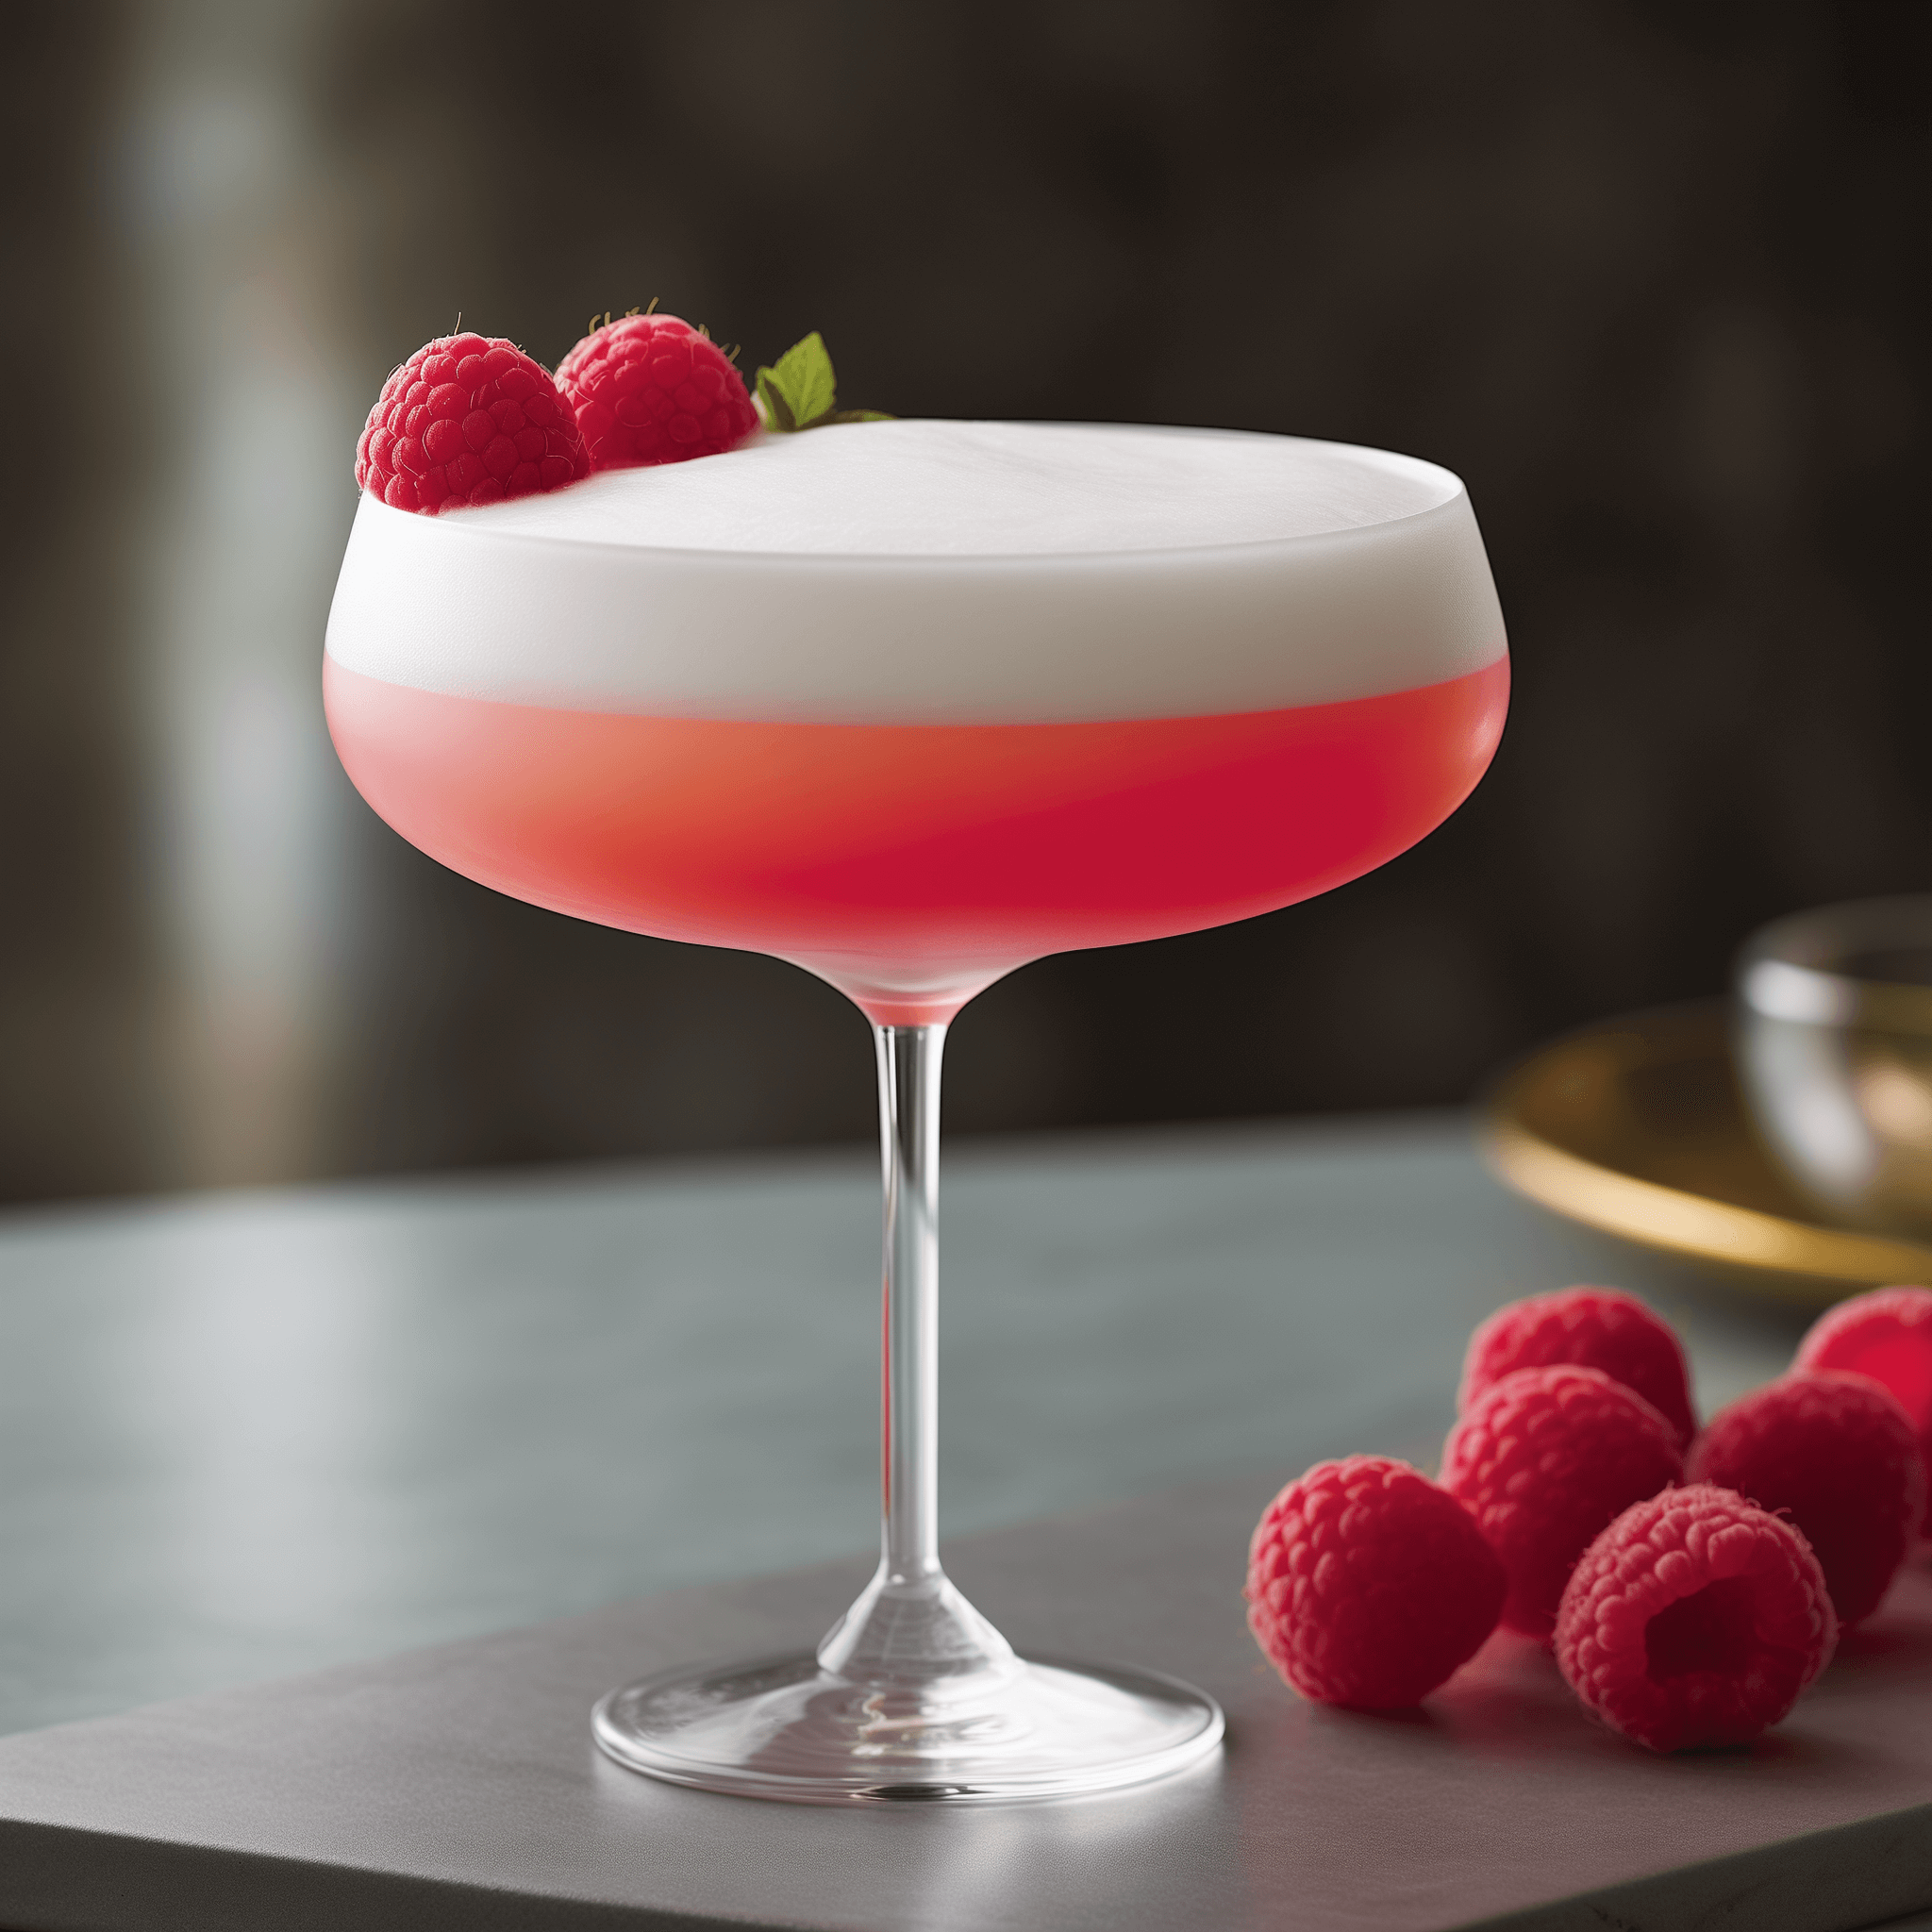 Raspberry Sour Cocktail Recipe - The Raspberry Sour is a delightful blend of tart and sweet flavors. The raspberries provide a fruity and slightly floral note, while the lemon juice adds a refreshing sourness. The simple syrup balances the acidity, and the egg white (optional) gives it a smooth, frothy texture.